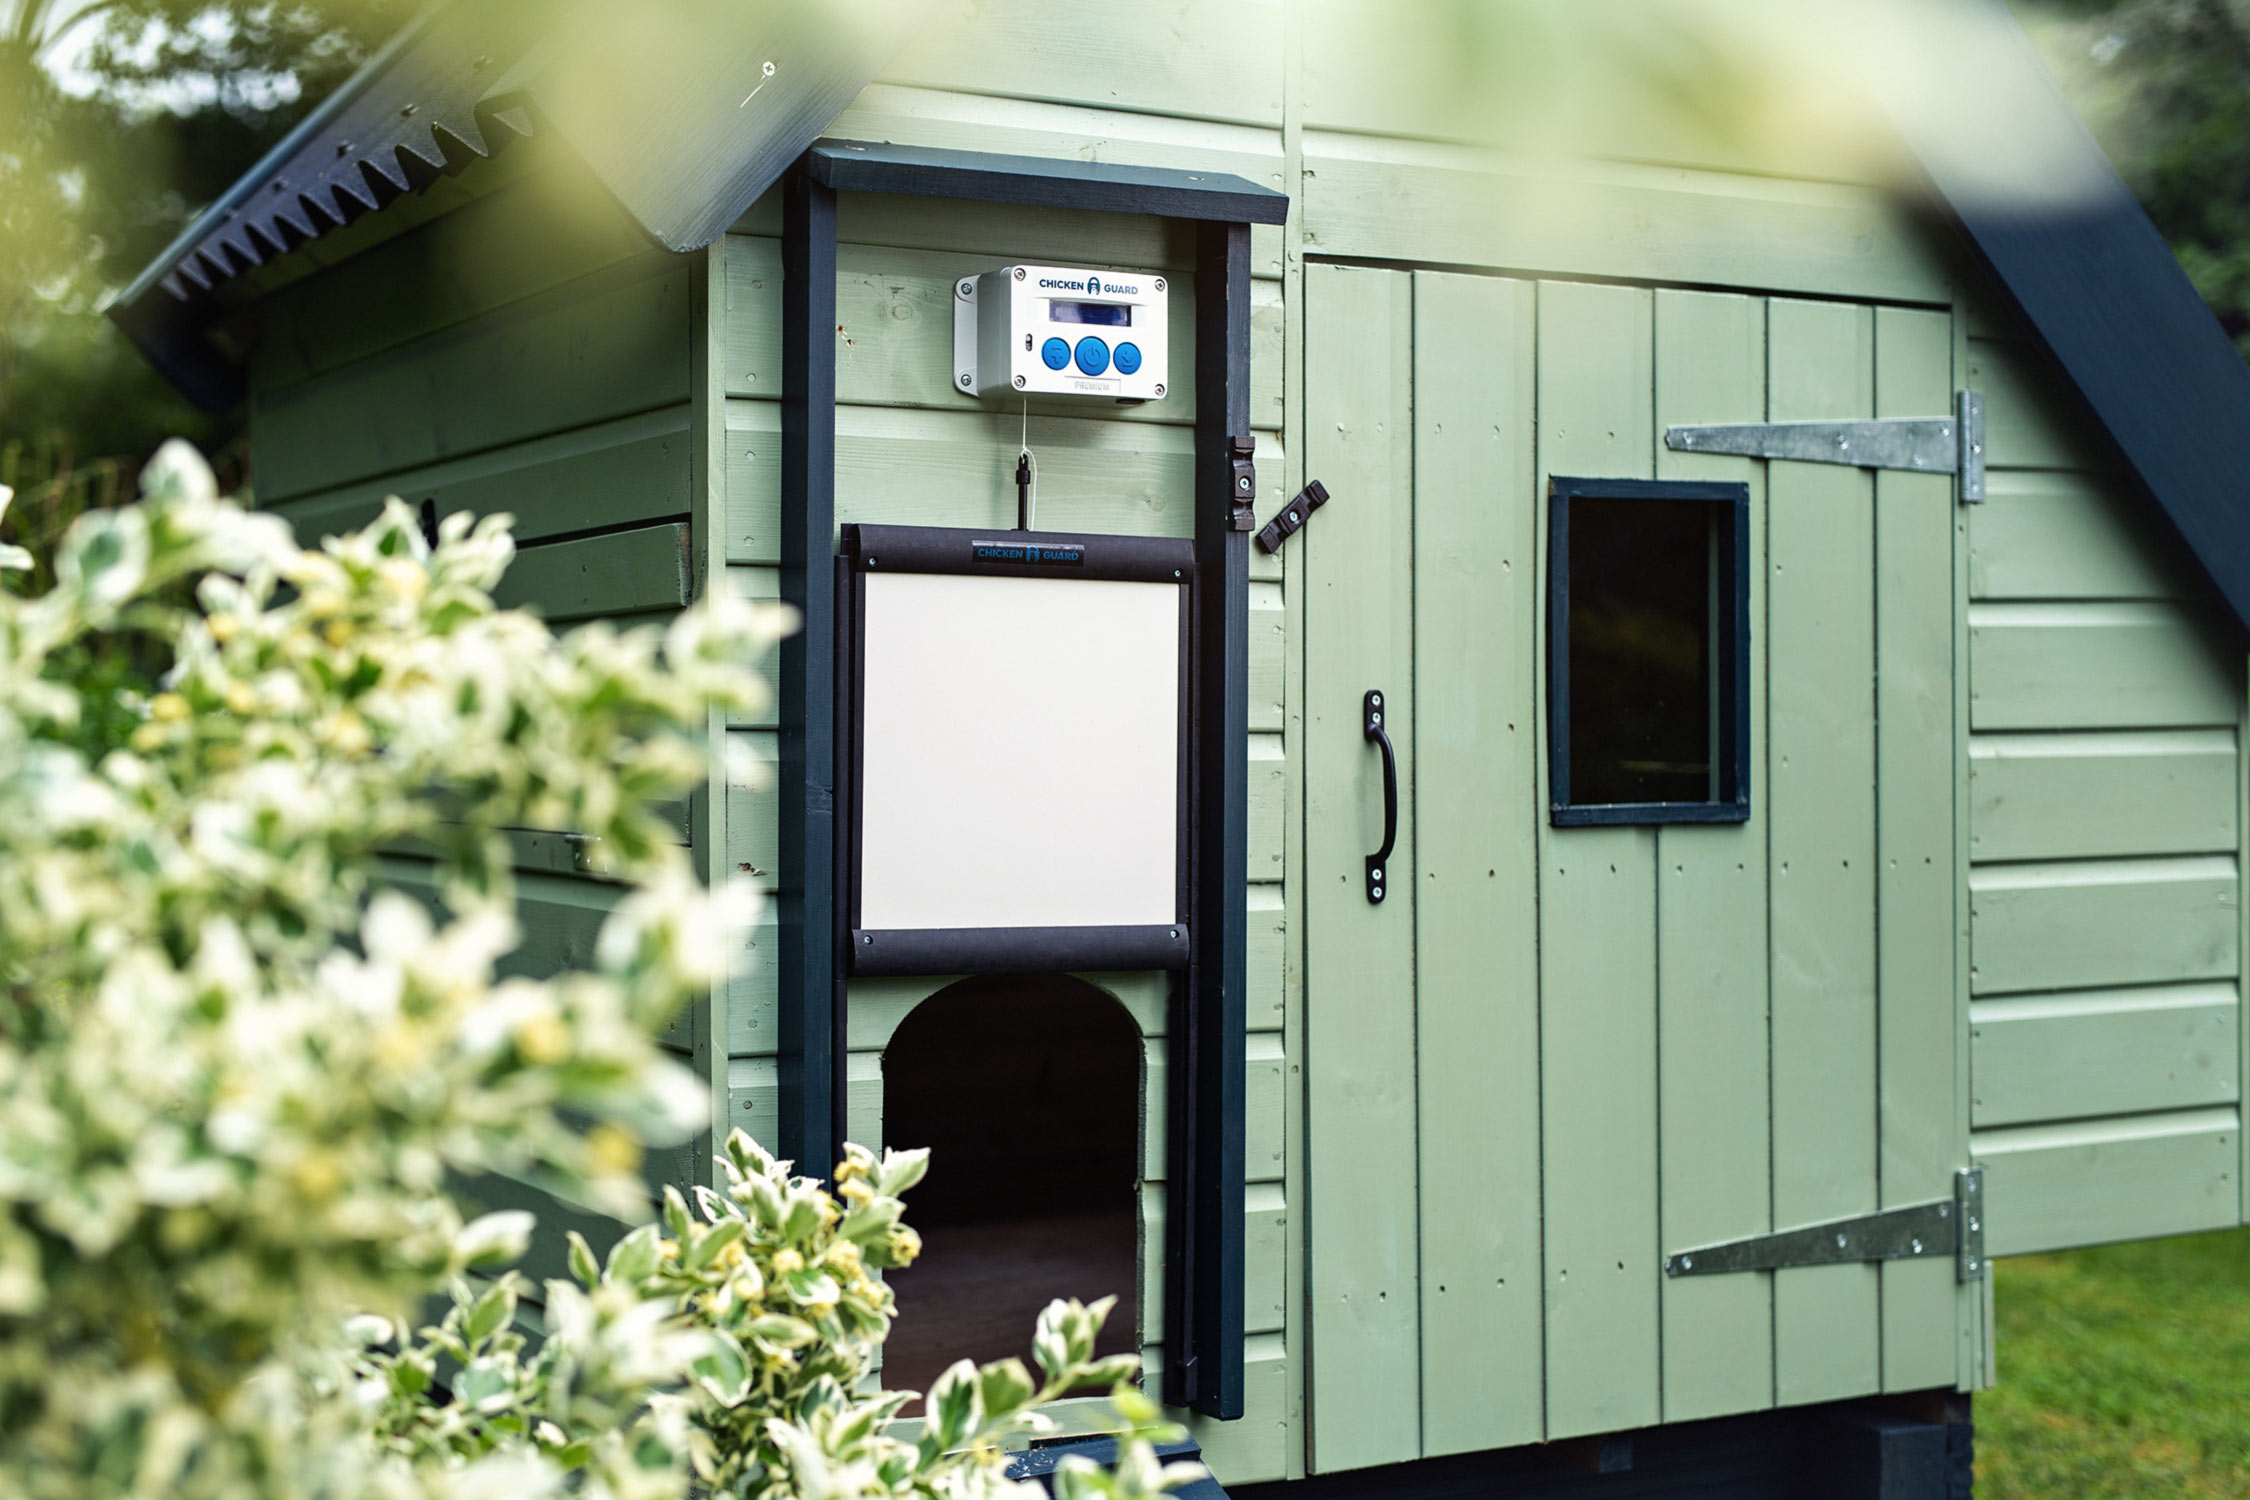 Location product photography of a luxury chicken coop and Chickenguard unit and door attached.